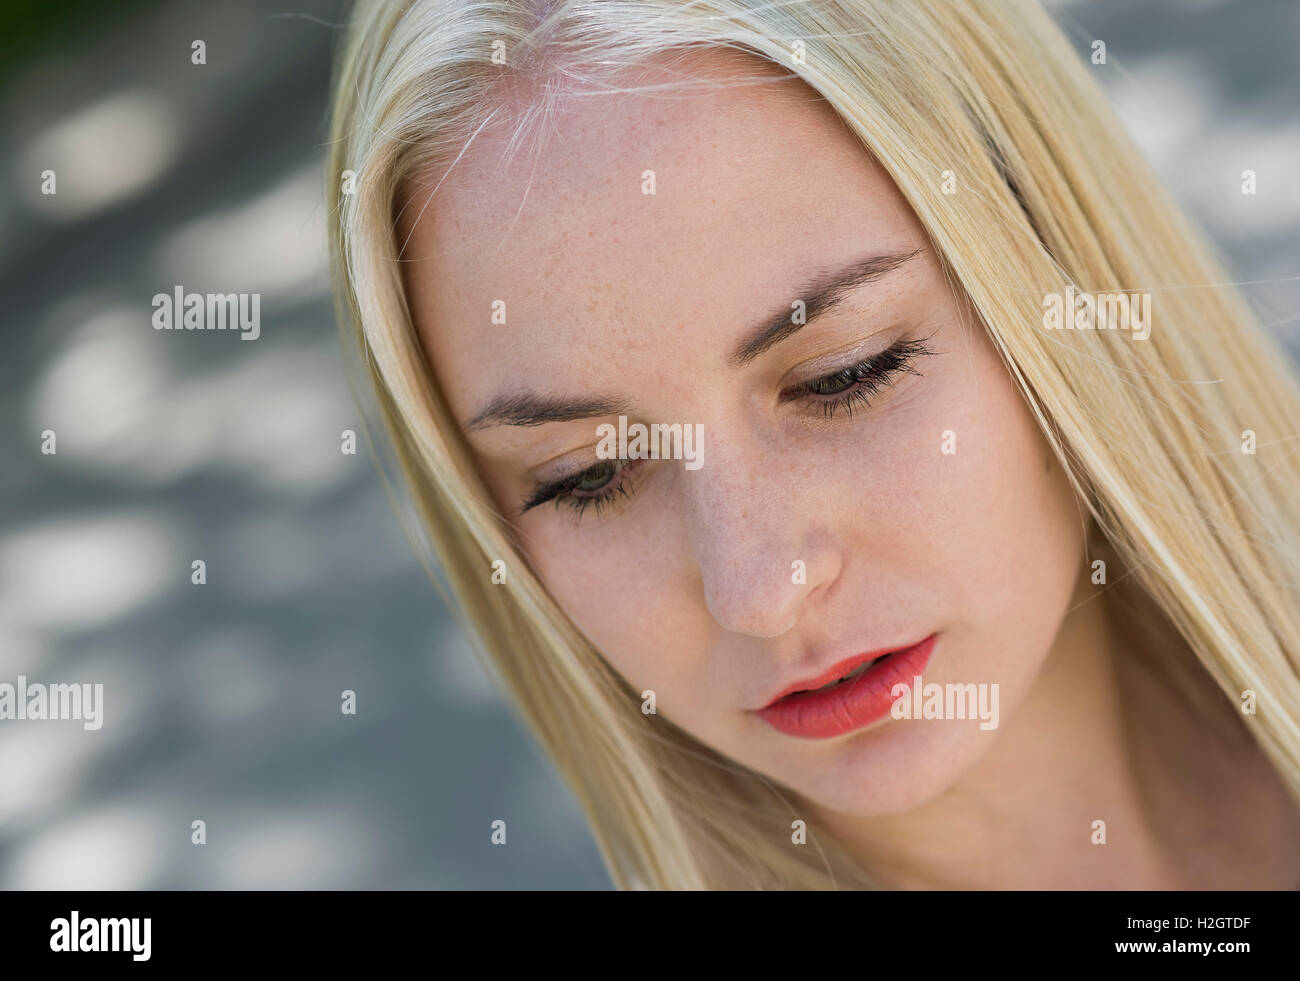 18 year old young woman with long blond hair, portrait Stock Photo